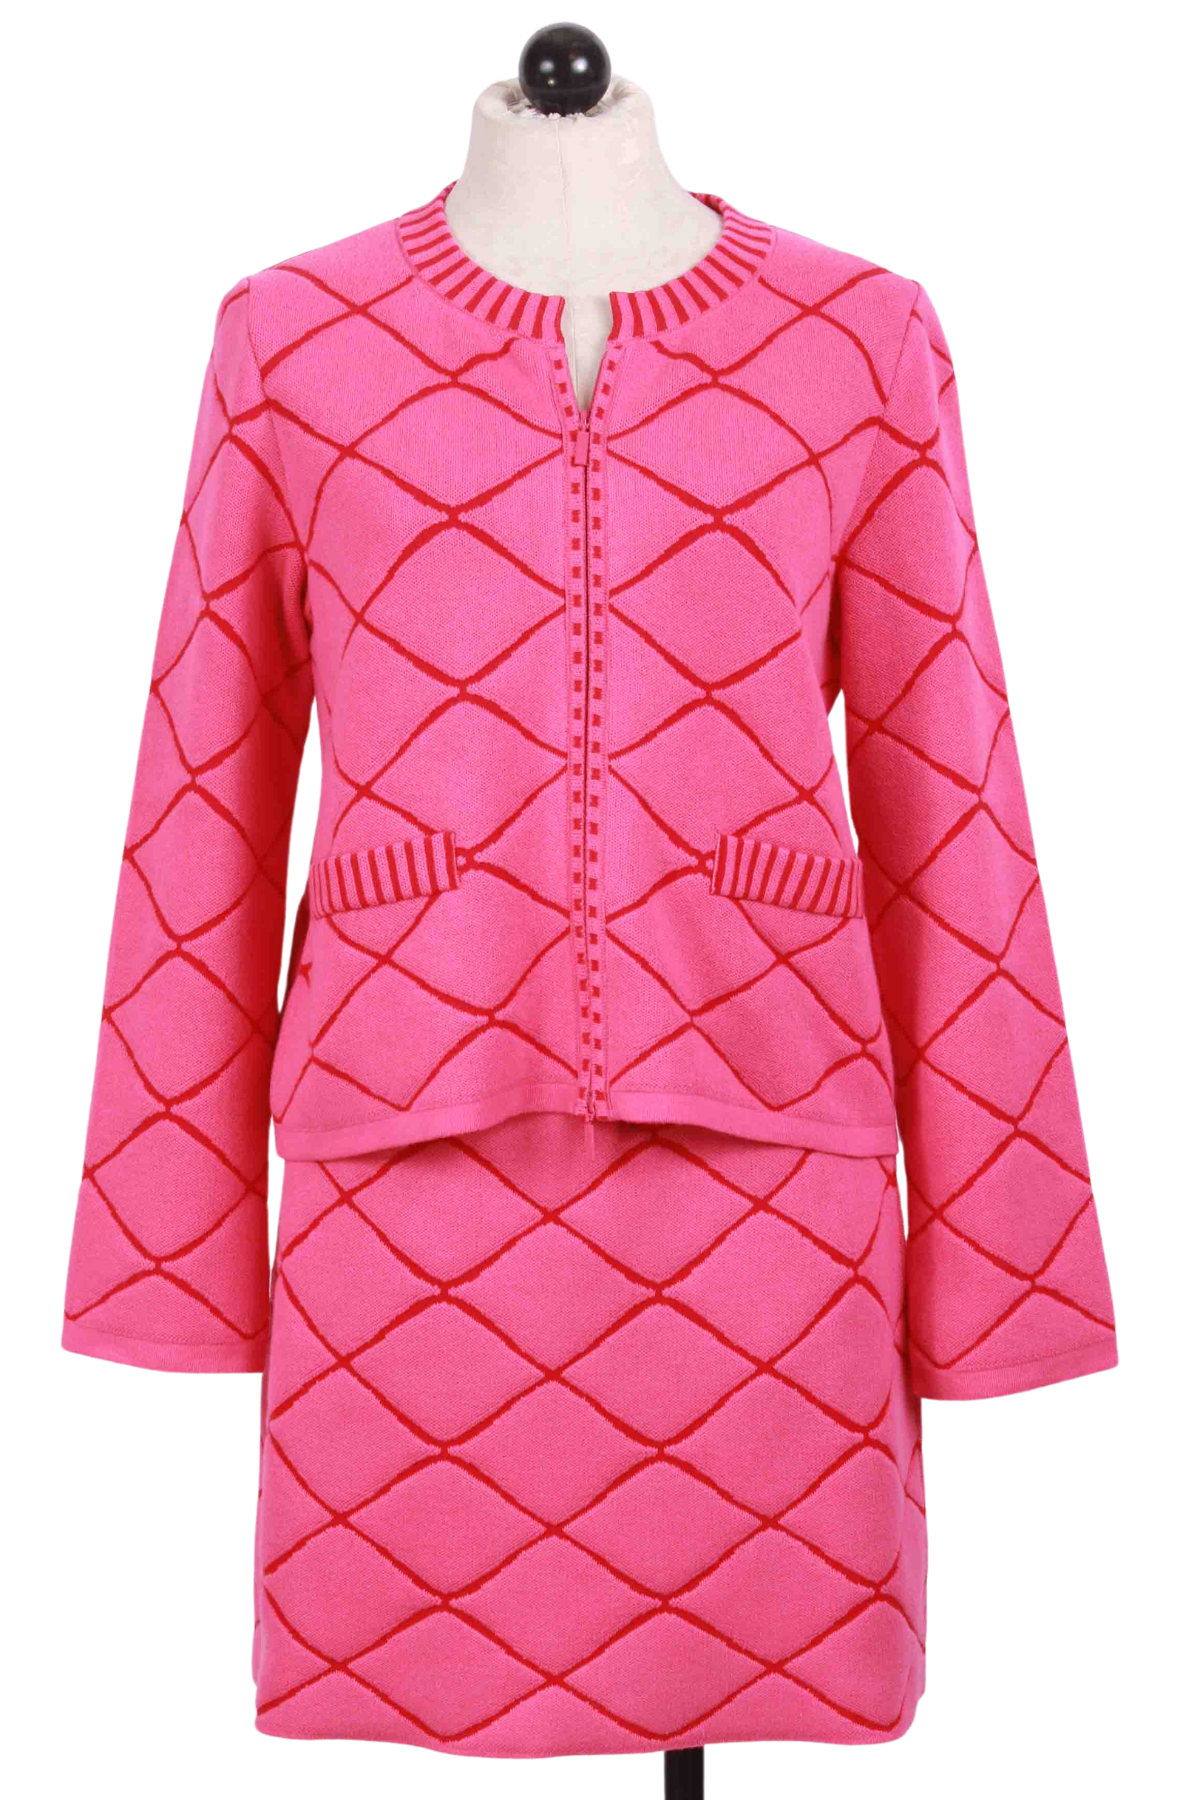 Pink and Red Structure Pattern Zip Front Jacket by Ivko with matching Structure Pattern Mini Skirt